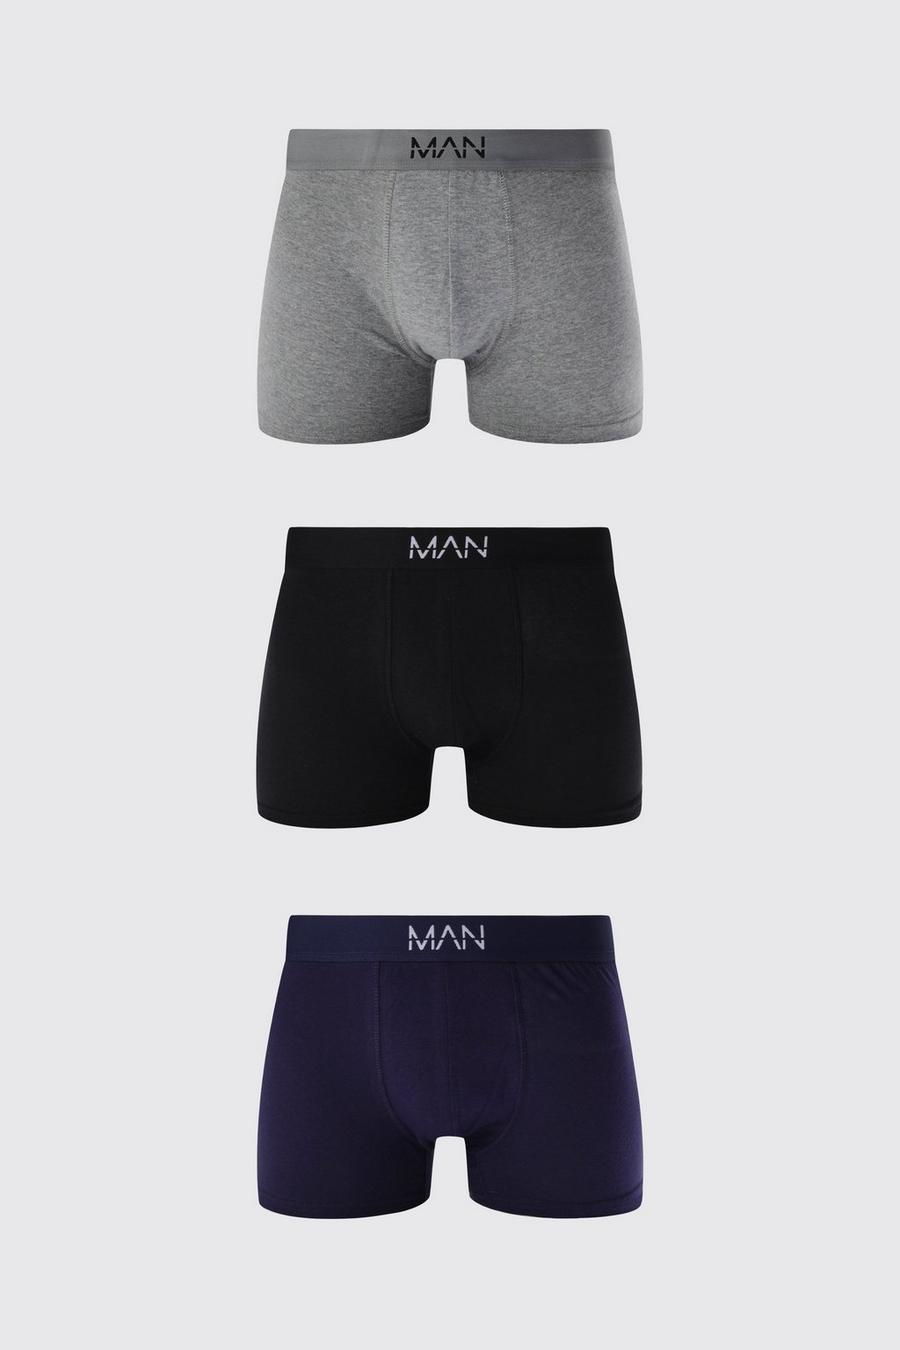 Multi 5 Pack Mixed Colour Man Trunks